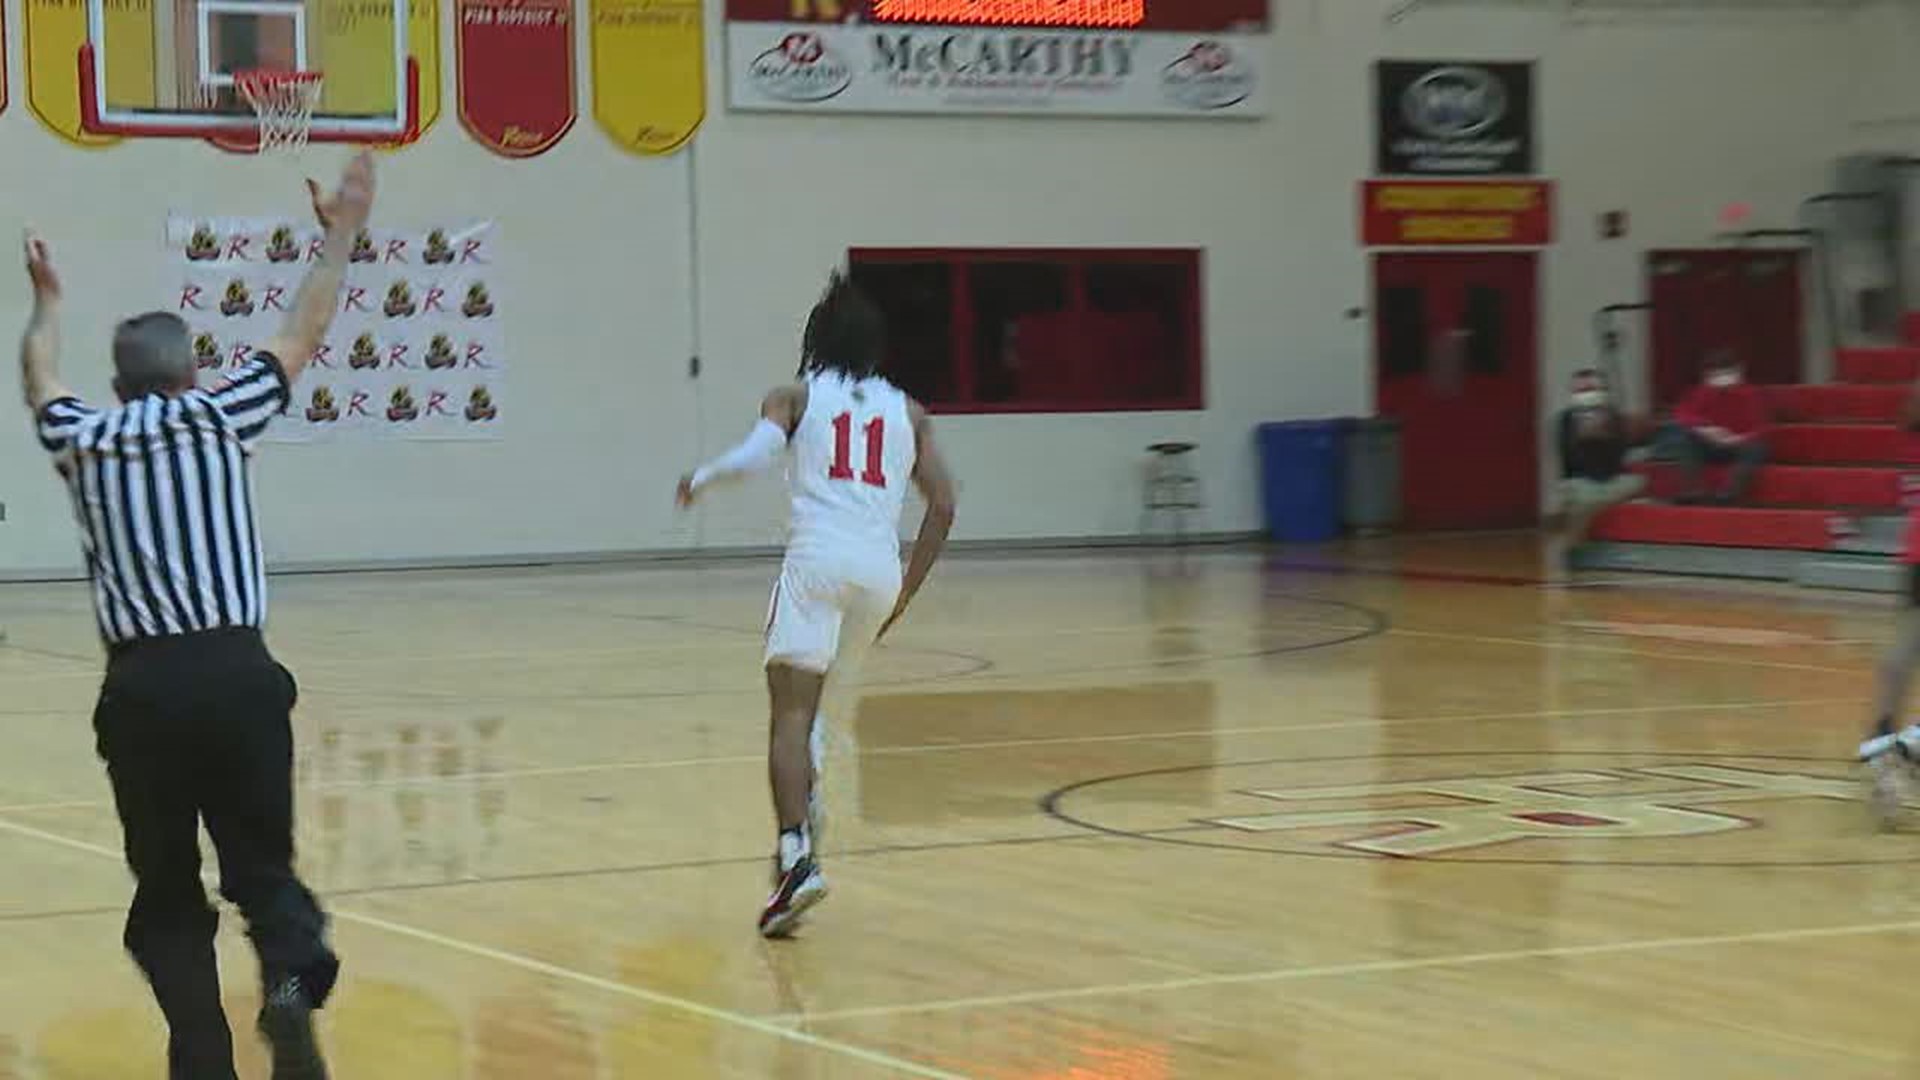 Justice Shoats hit a three pointer at the buzzer and the #1 Holy Redeemer boys basketball team stunned #3 Williamsport 51-50 in a Super 16 Showdown